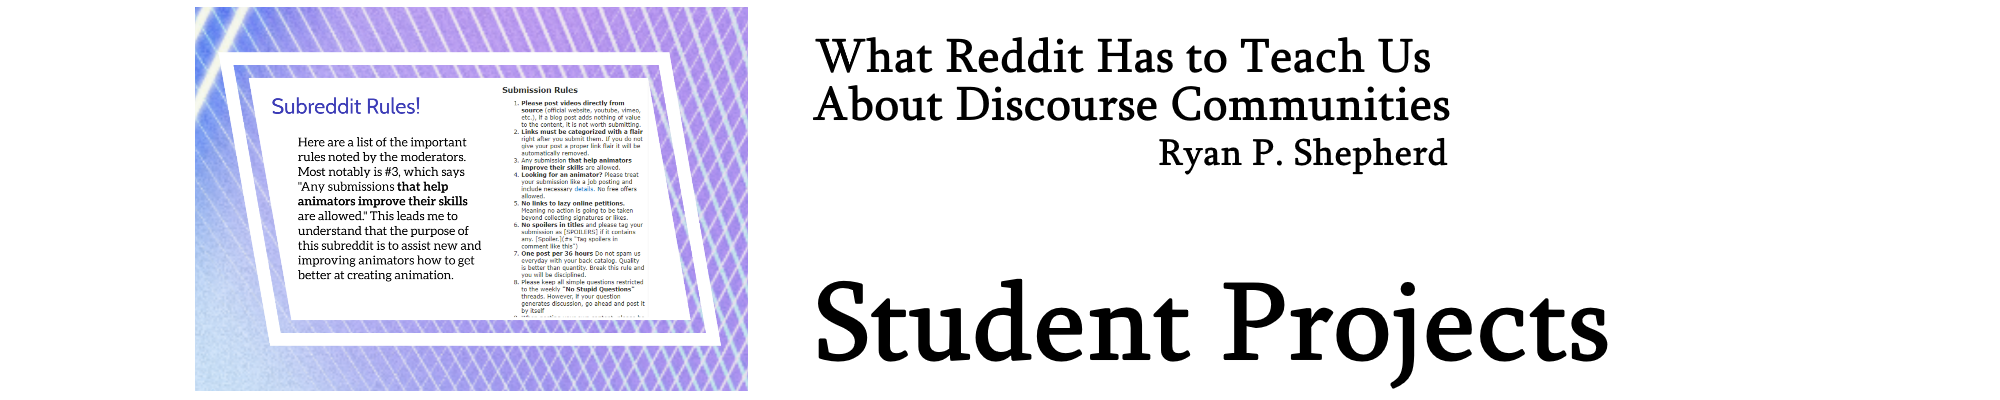 Banner reads What Reddit Has to Teach Us About Discourse Communities and Student Projects